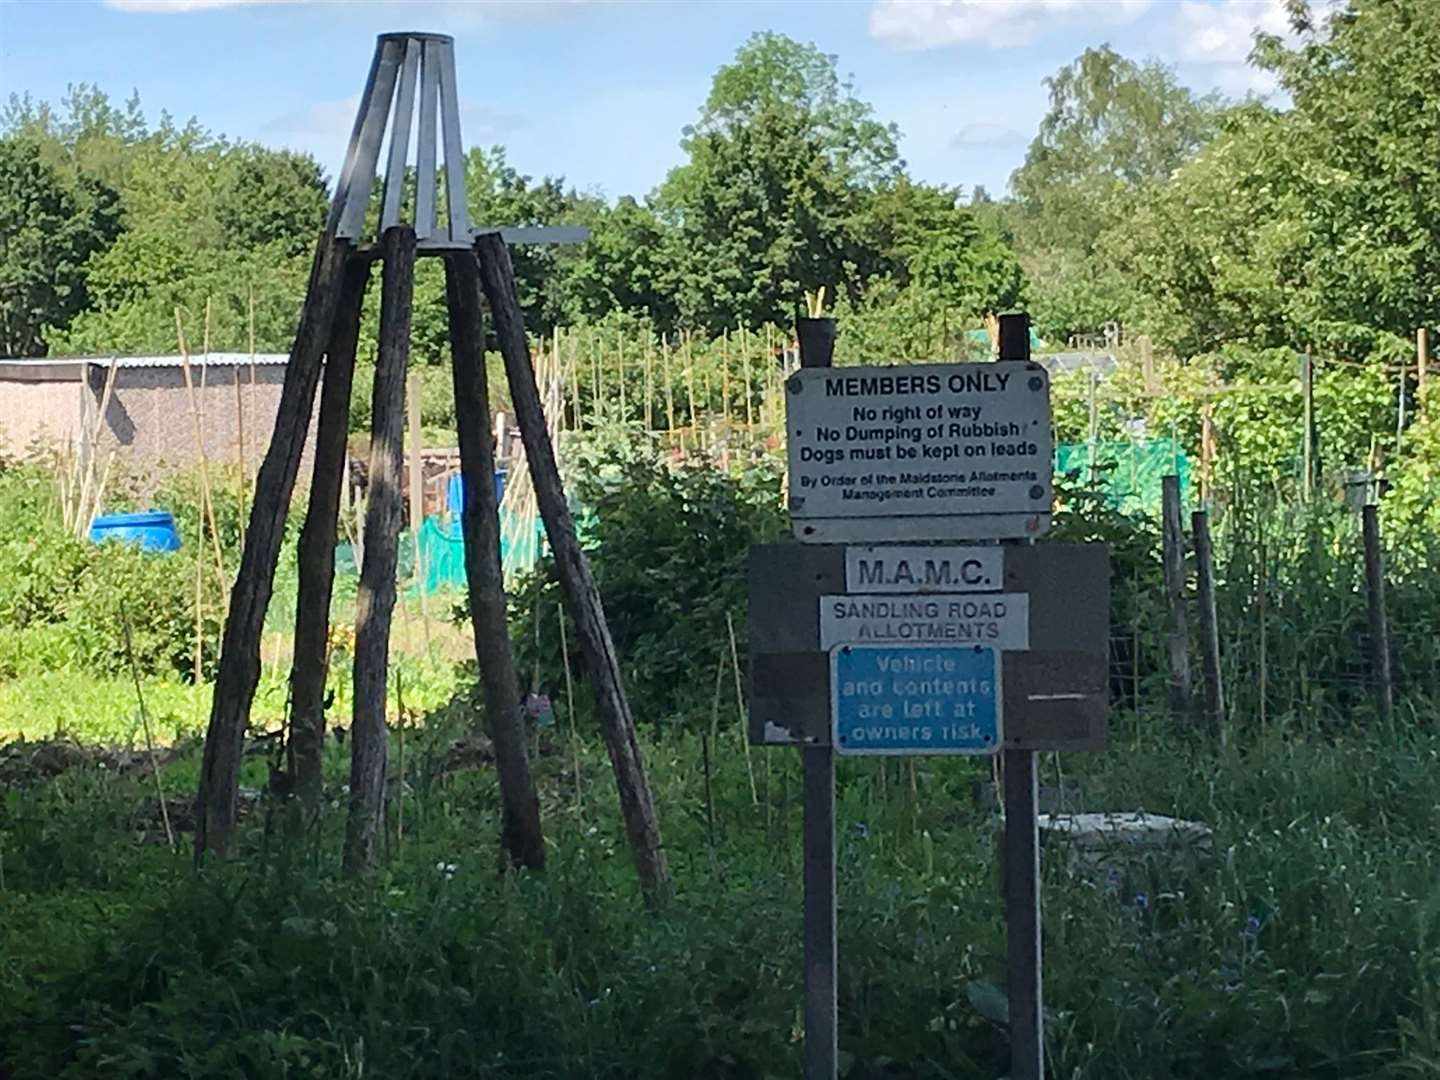 Sandling Road allotments in Maidstone